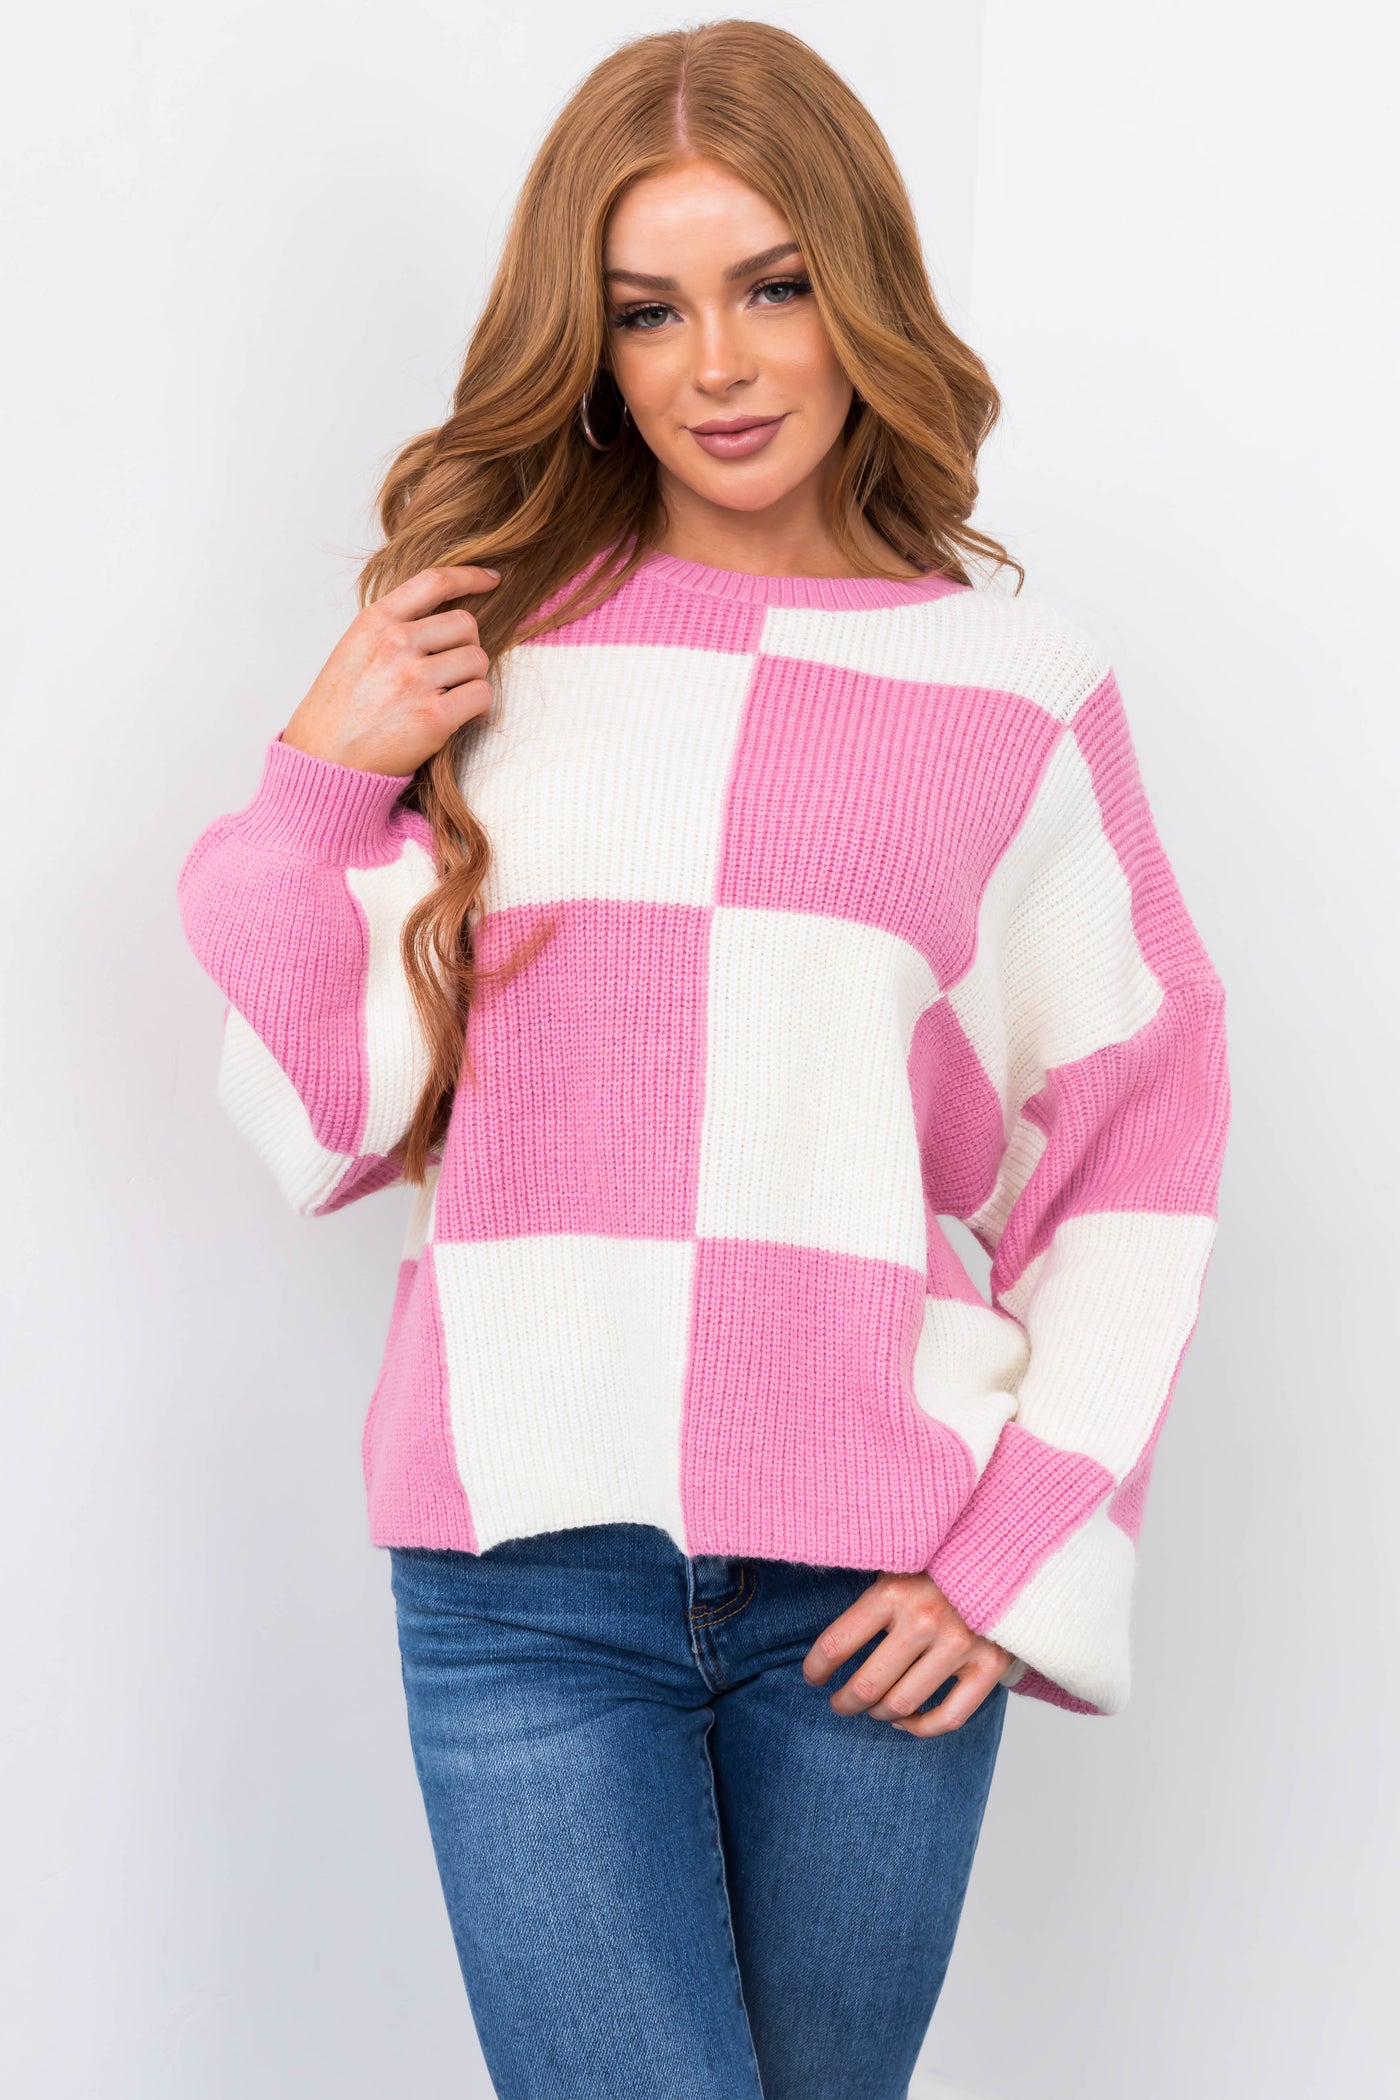 Cool Pink and Cream Checkered Oversized Sweater